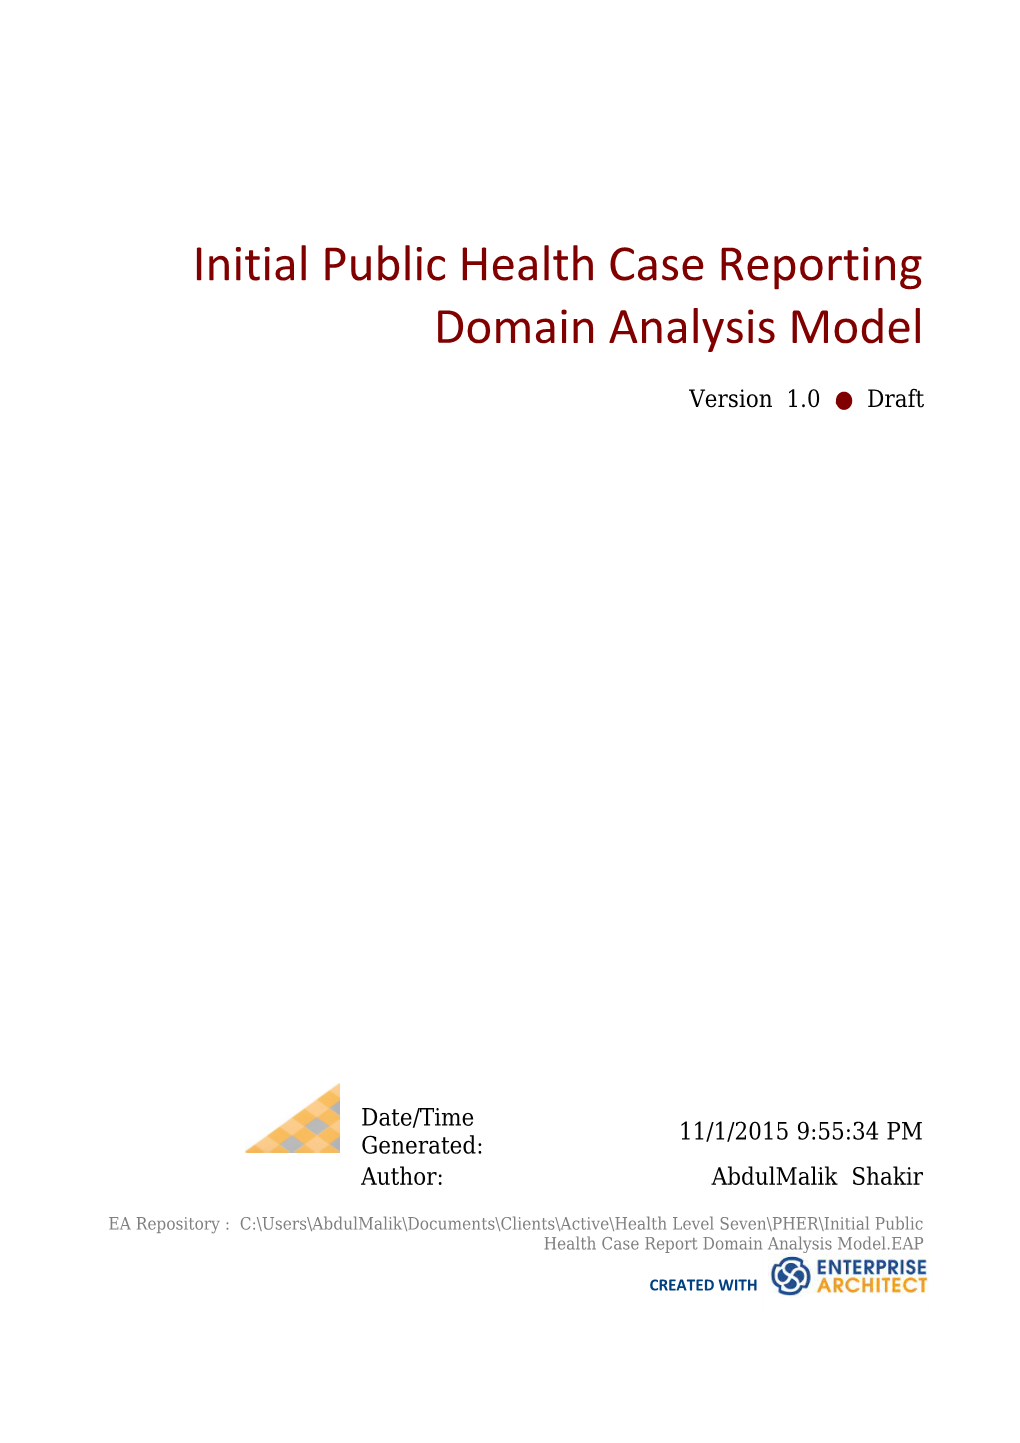 Initial Public Health Case Reporting Domain Analysis Model